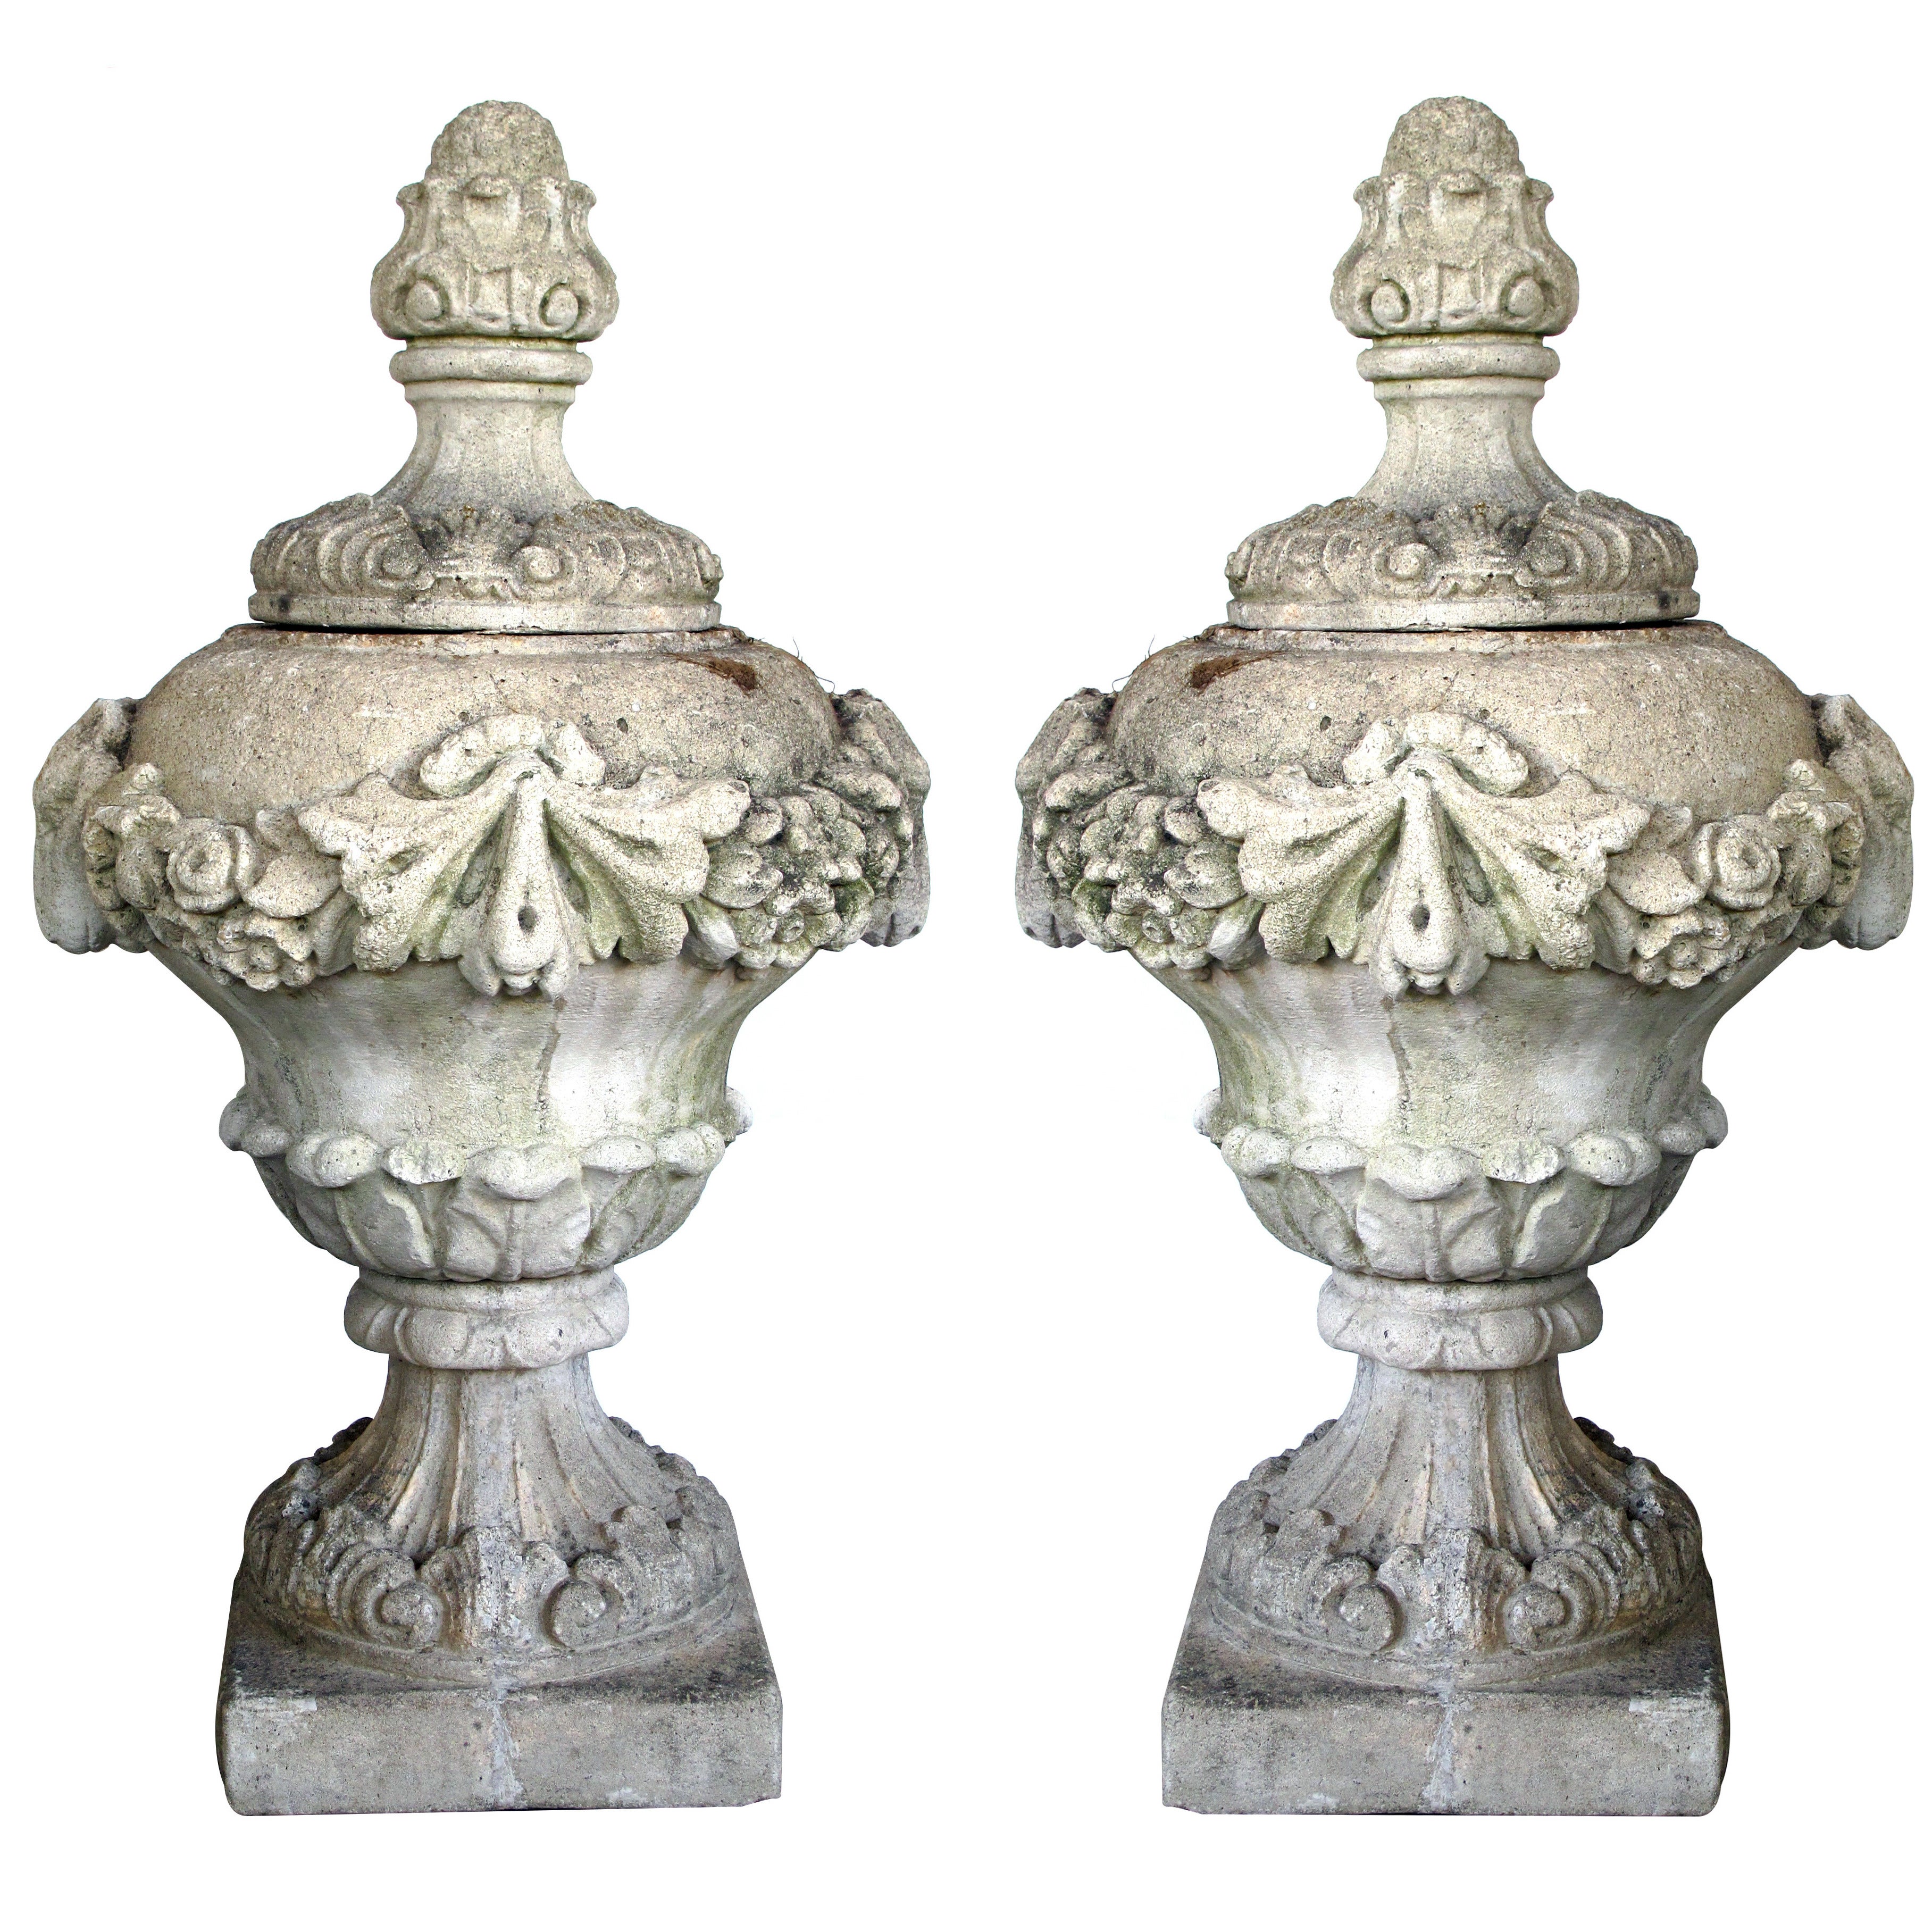 Pair of English Cast Stone Urn-Form Finials with Swag and Ram's-Head Motif